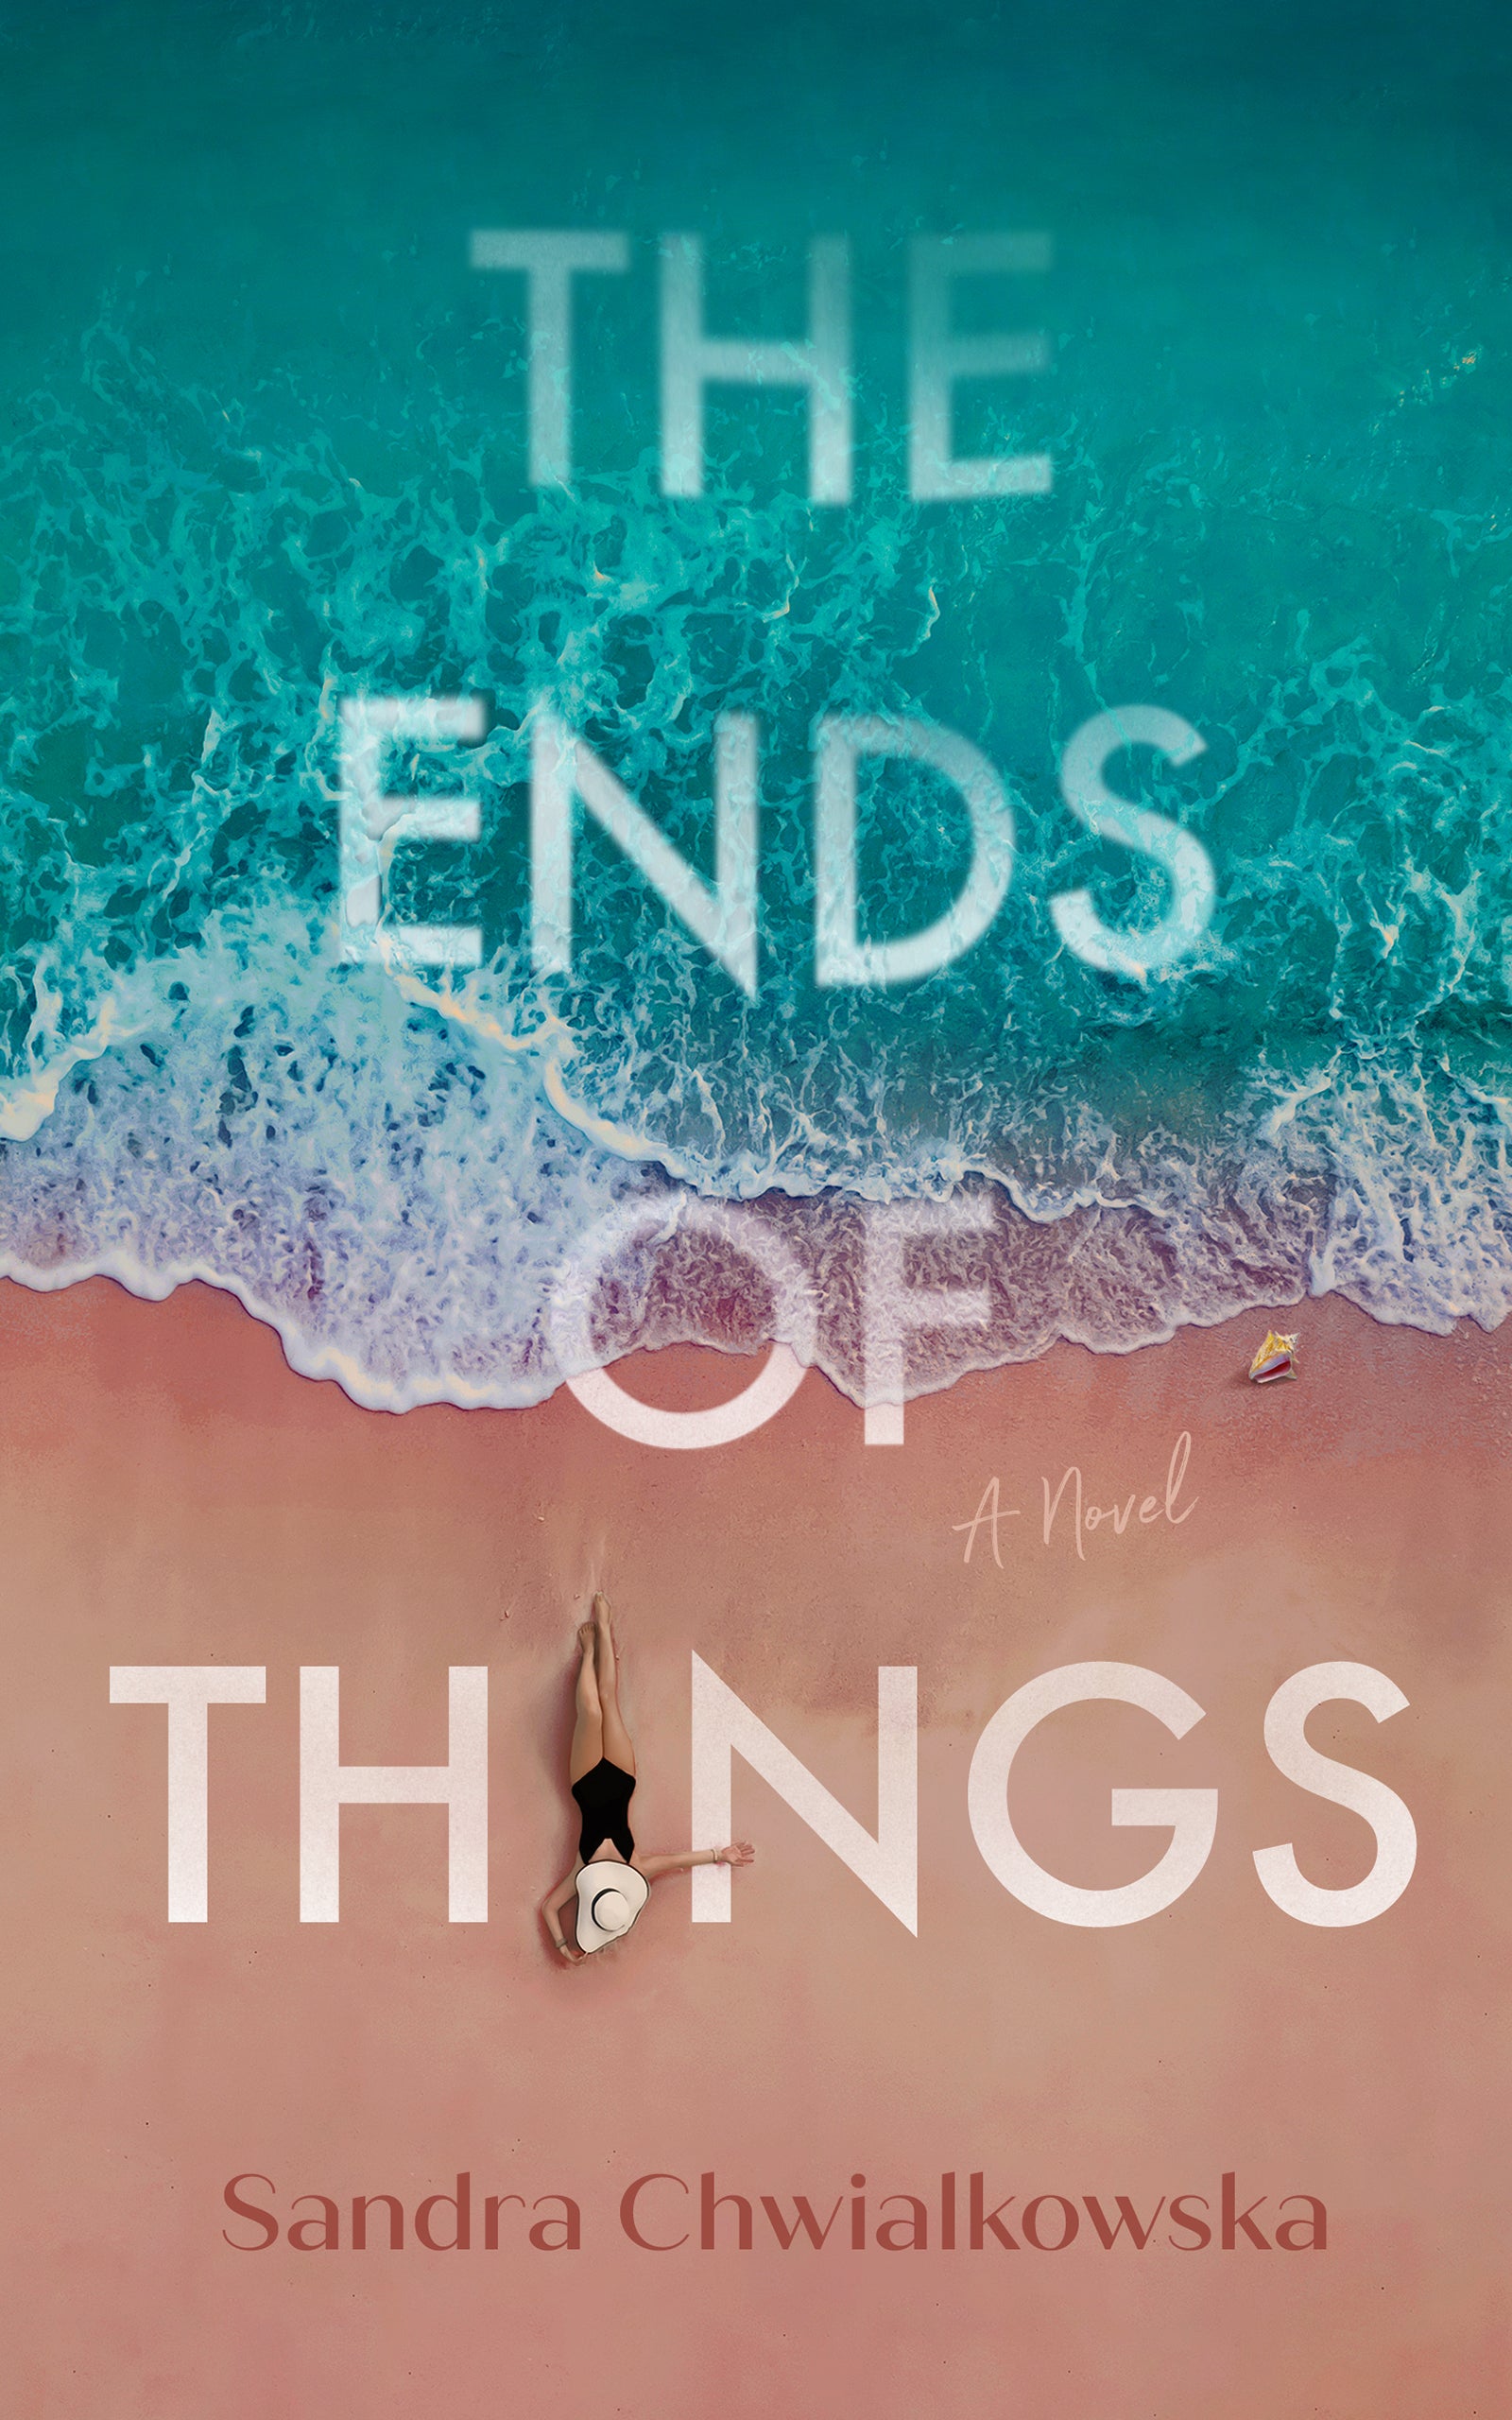 The Ends of Things